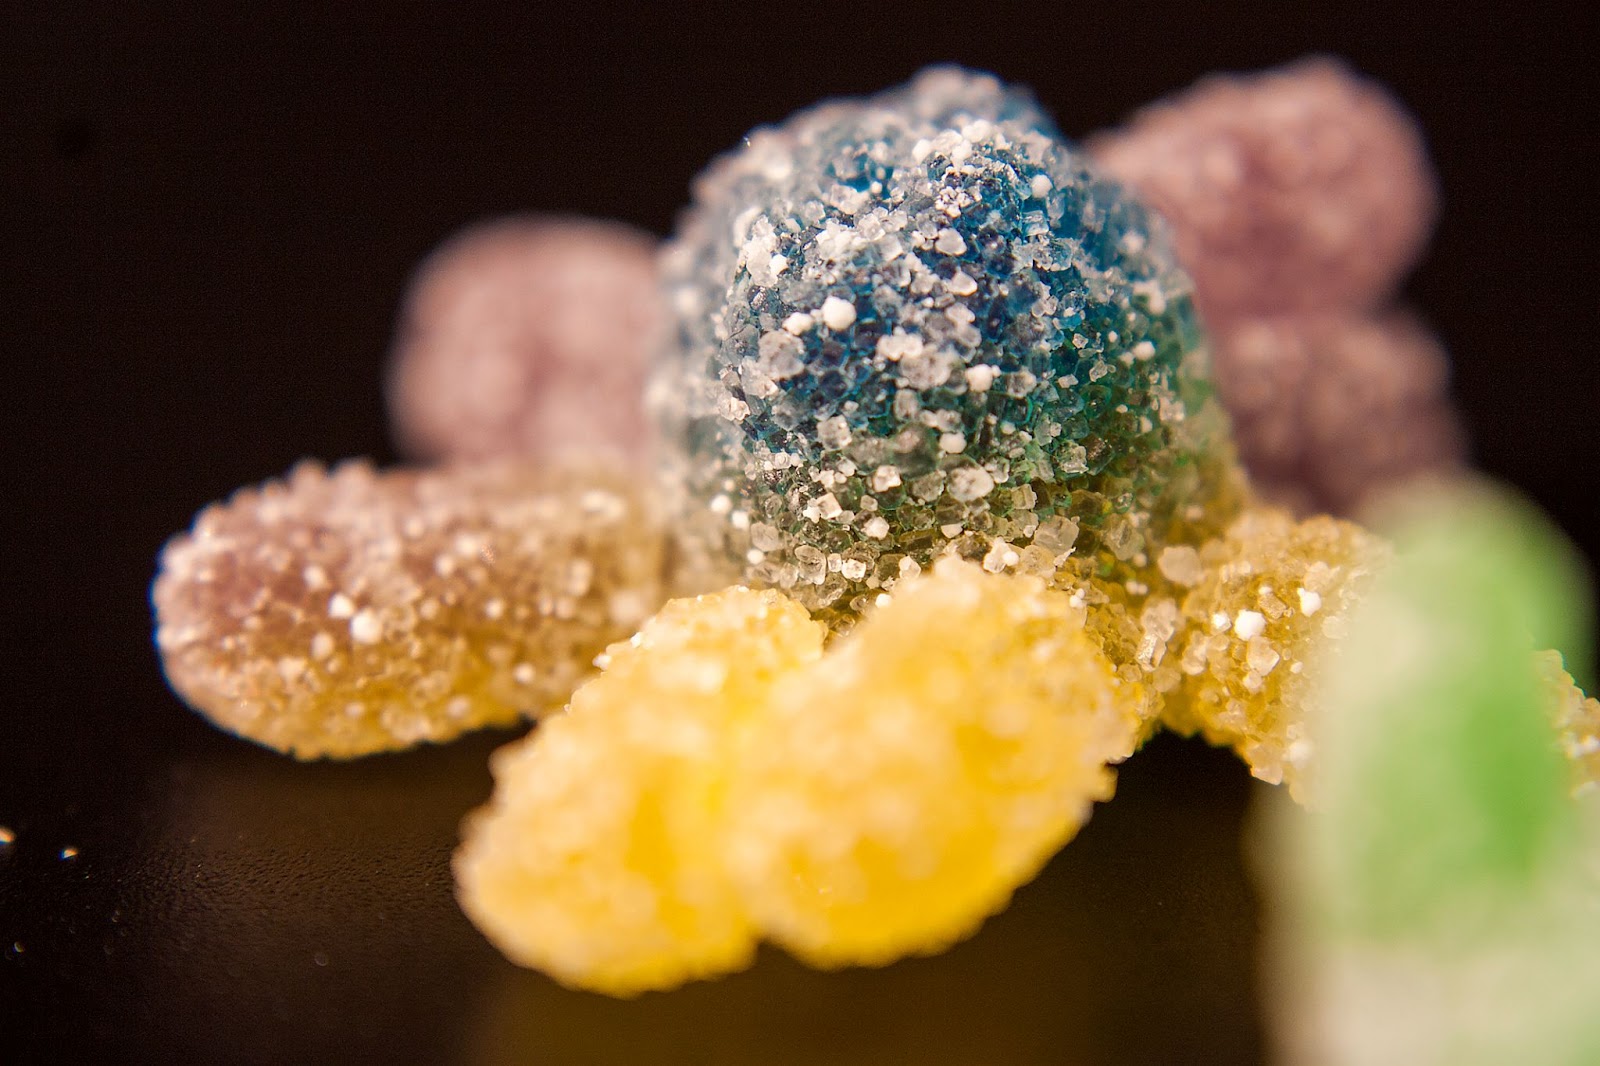 Close-up of sugar-coated sour gummy candies.